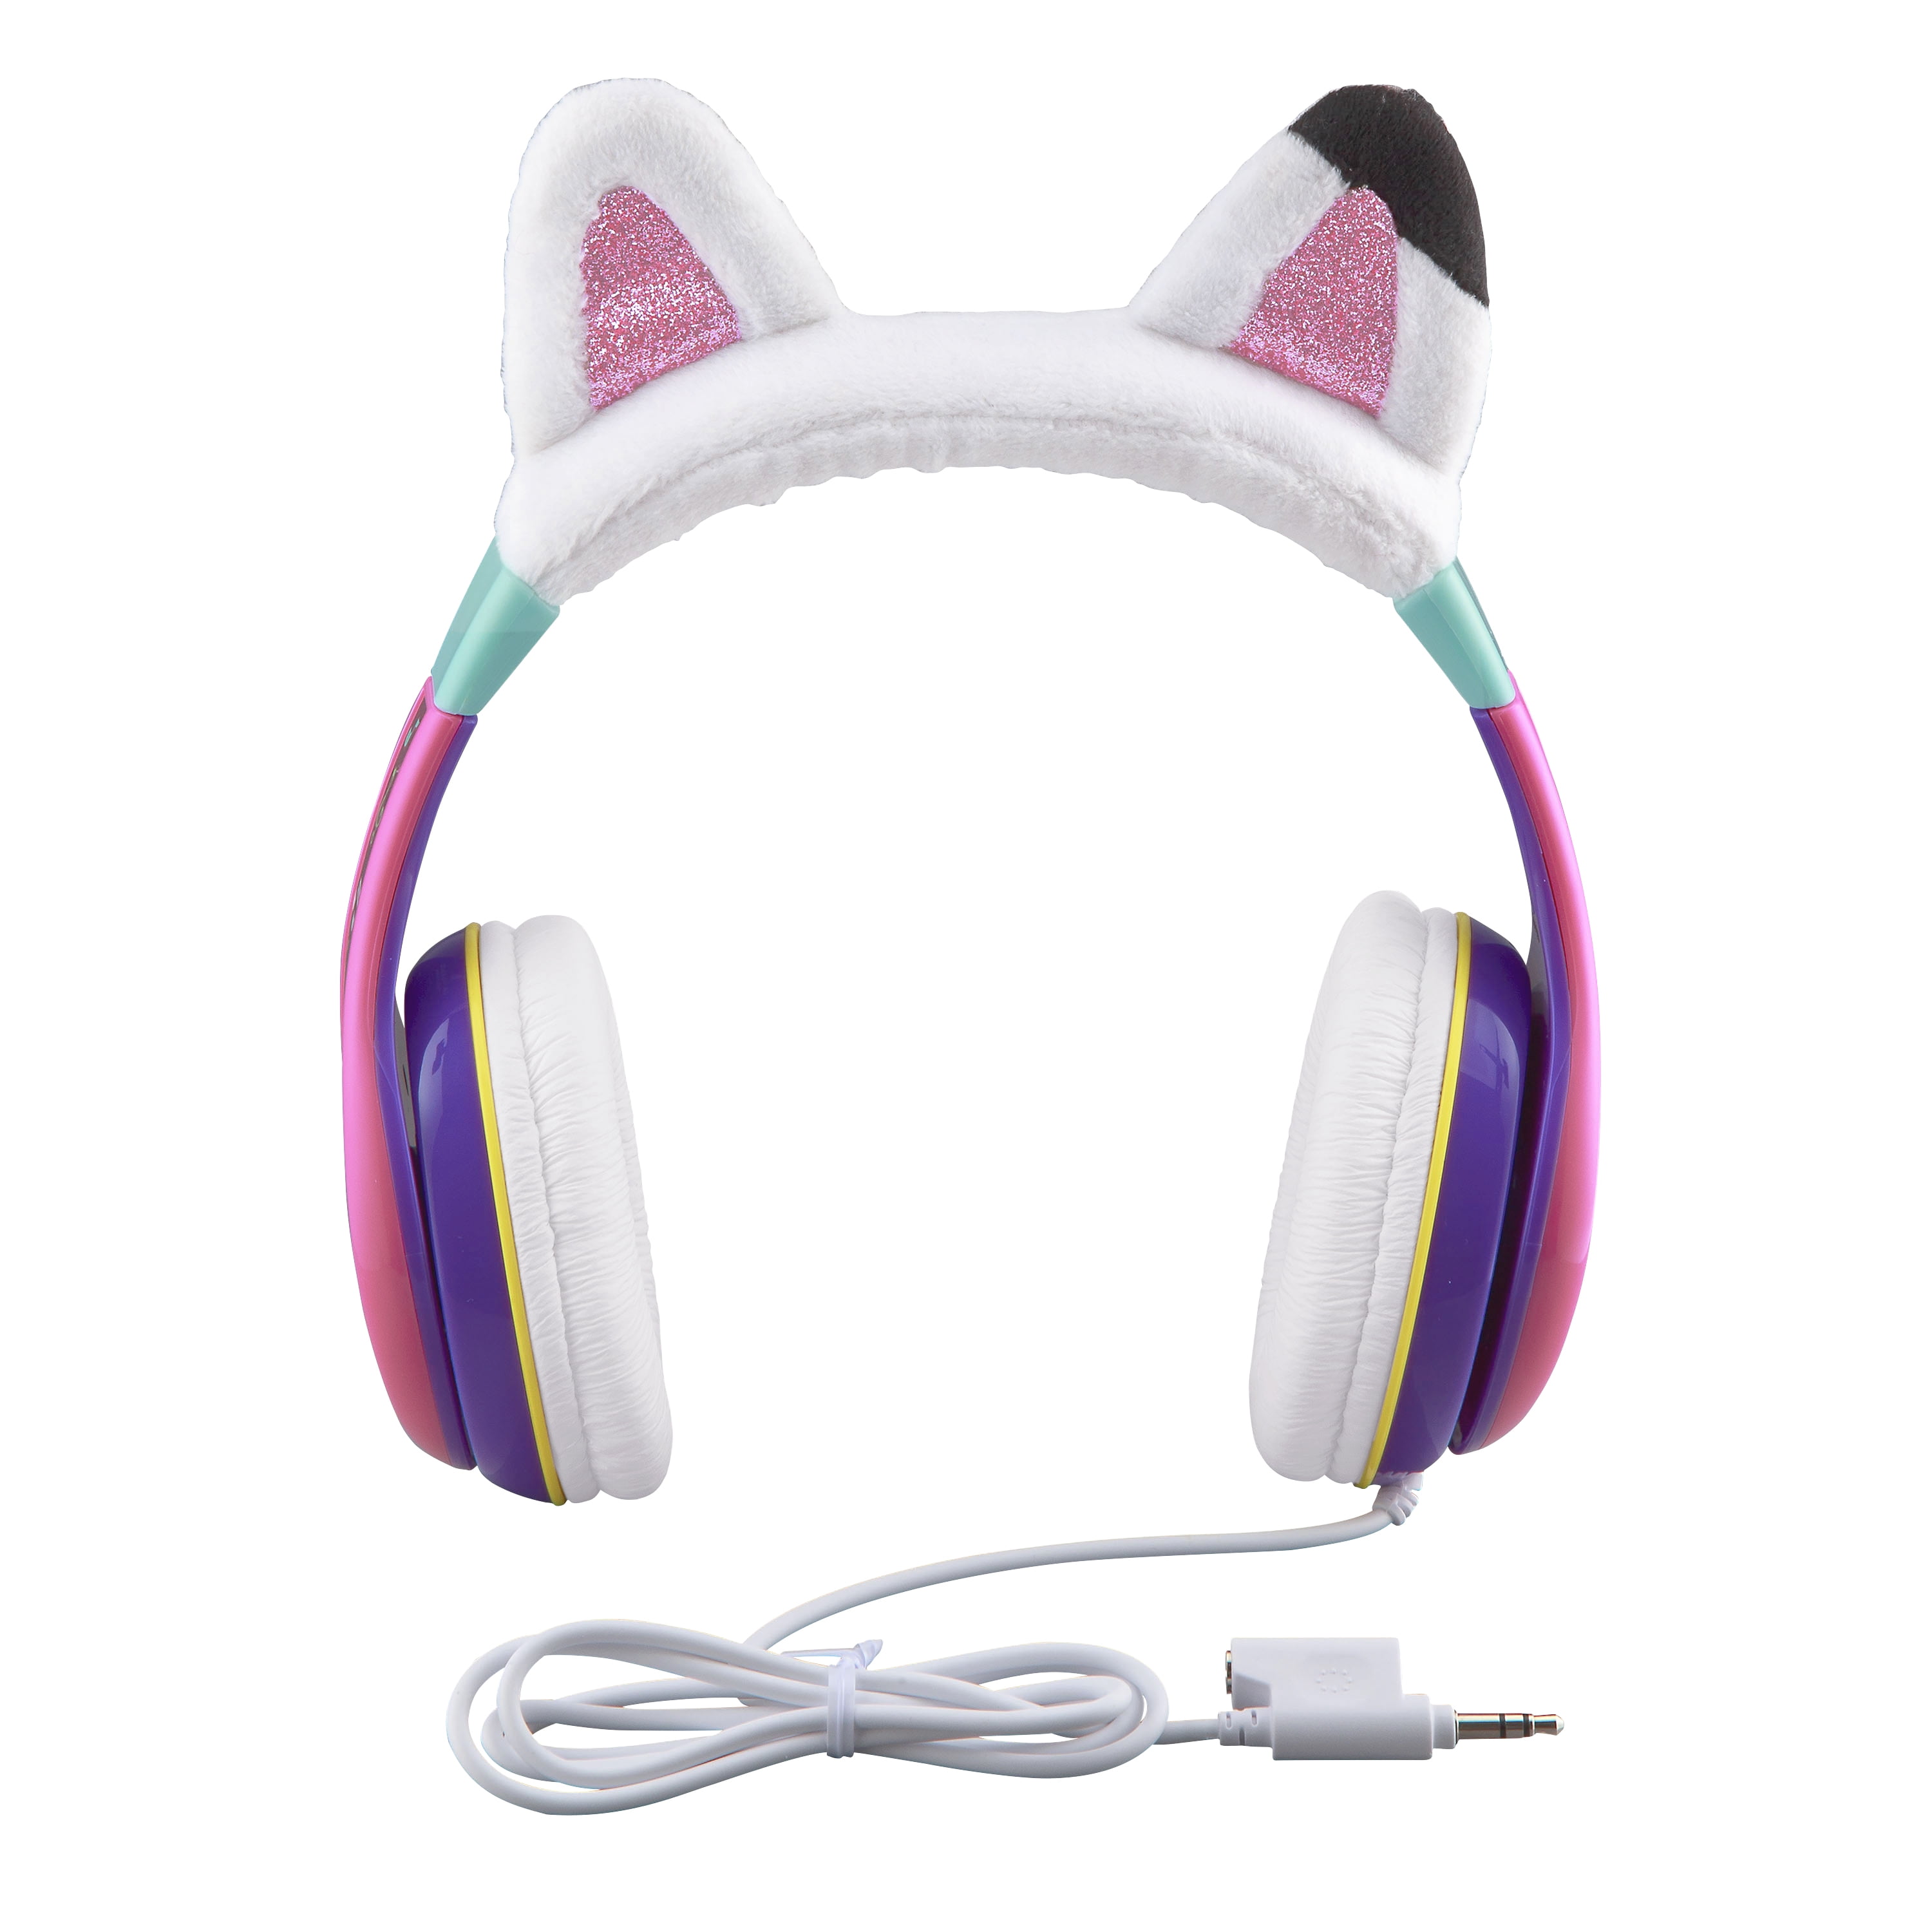 Gabby's Dollhouse Wired Headphones with Share Port and Parental Volume Limiter to Protect Sensitive Hearing.